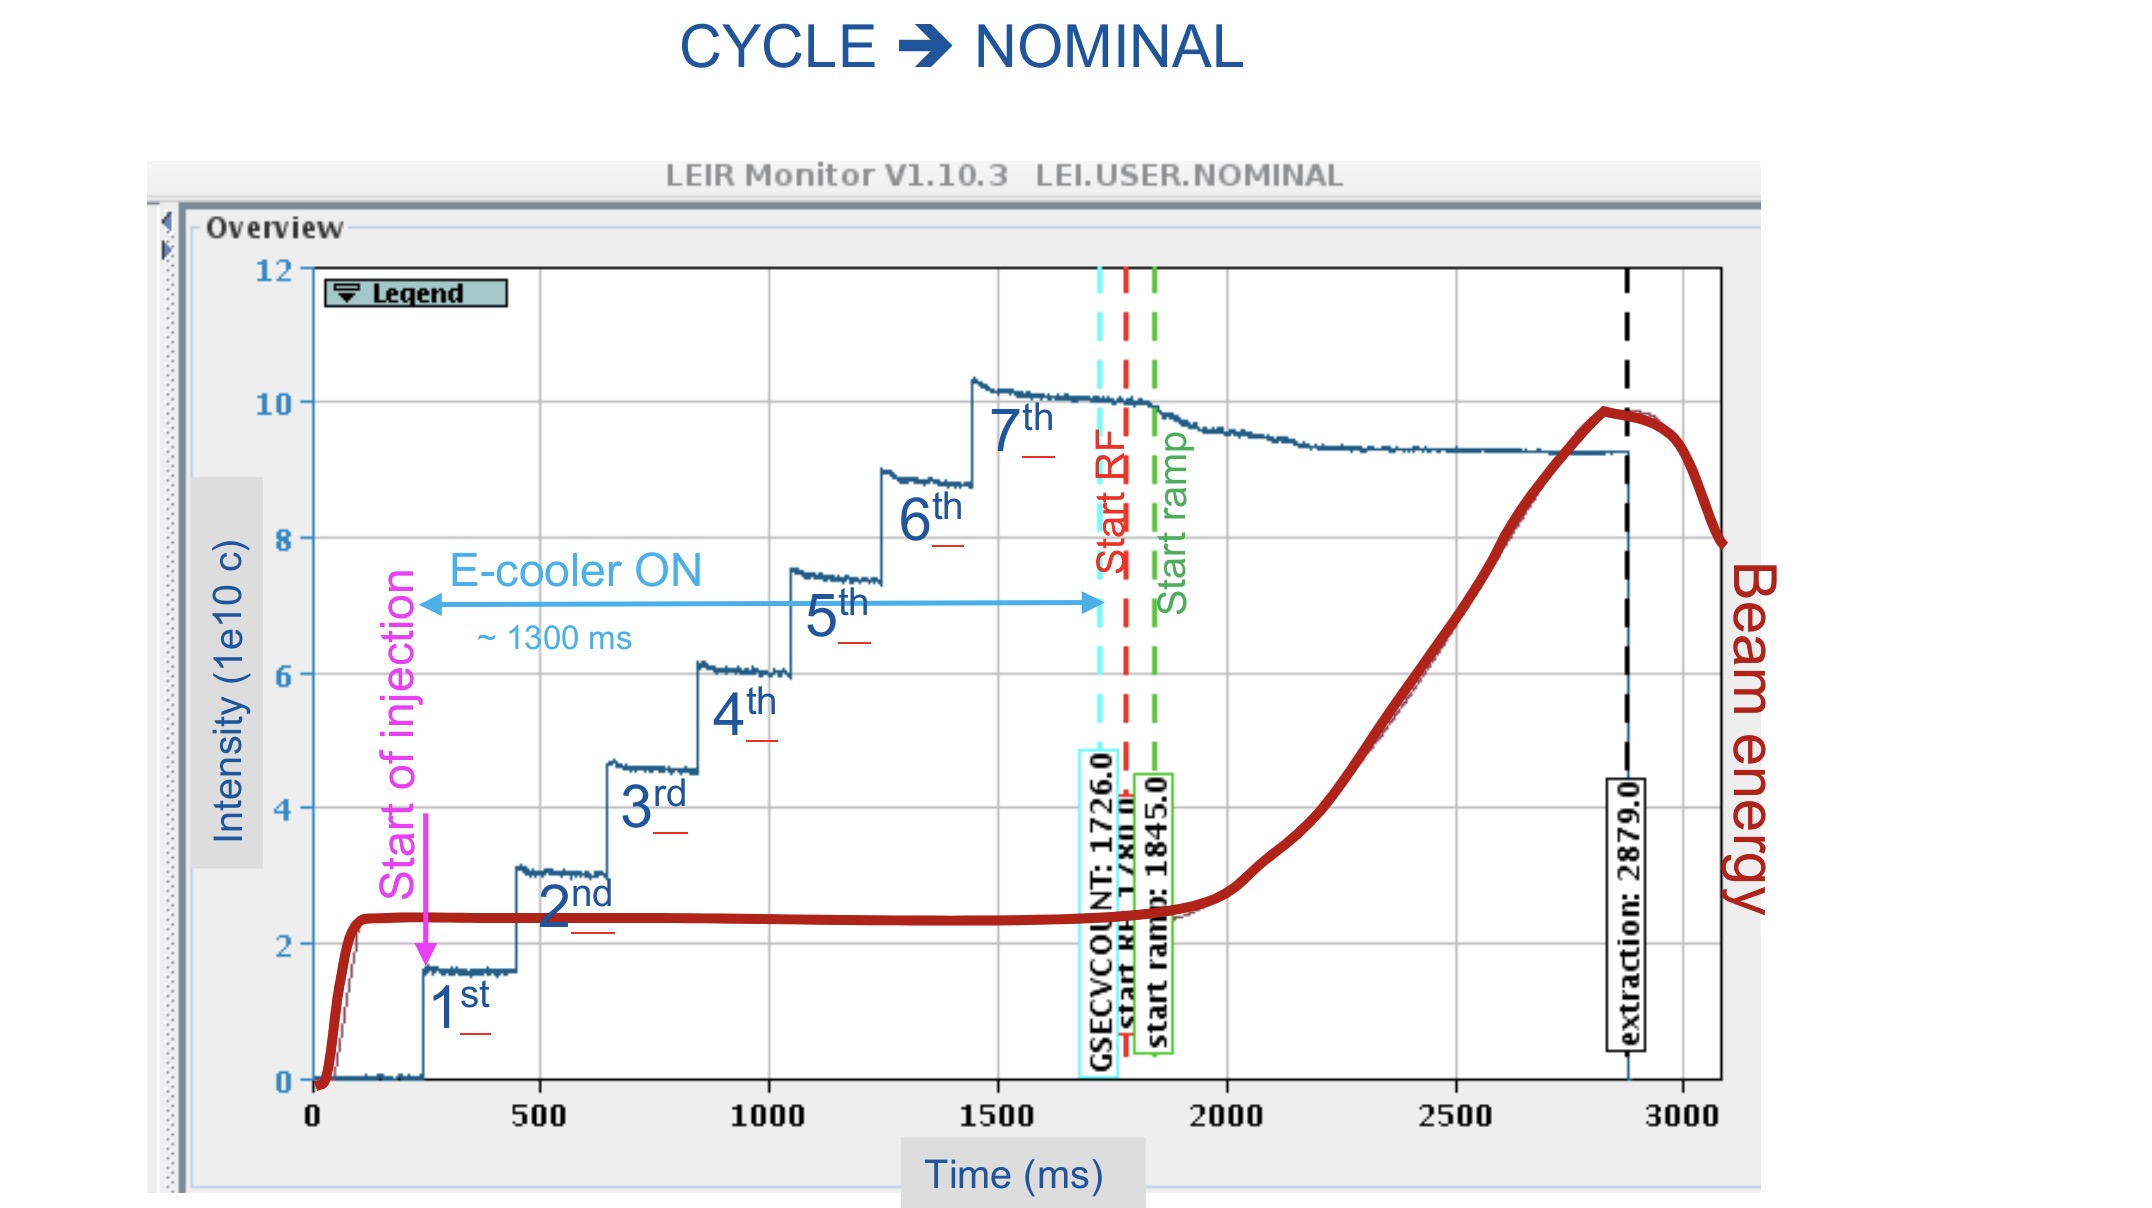 LEIR 7 Injection Cycle : NOMINAL